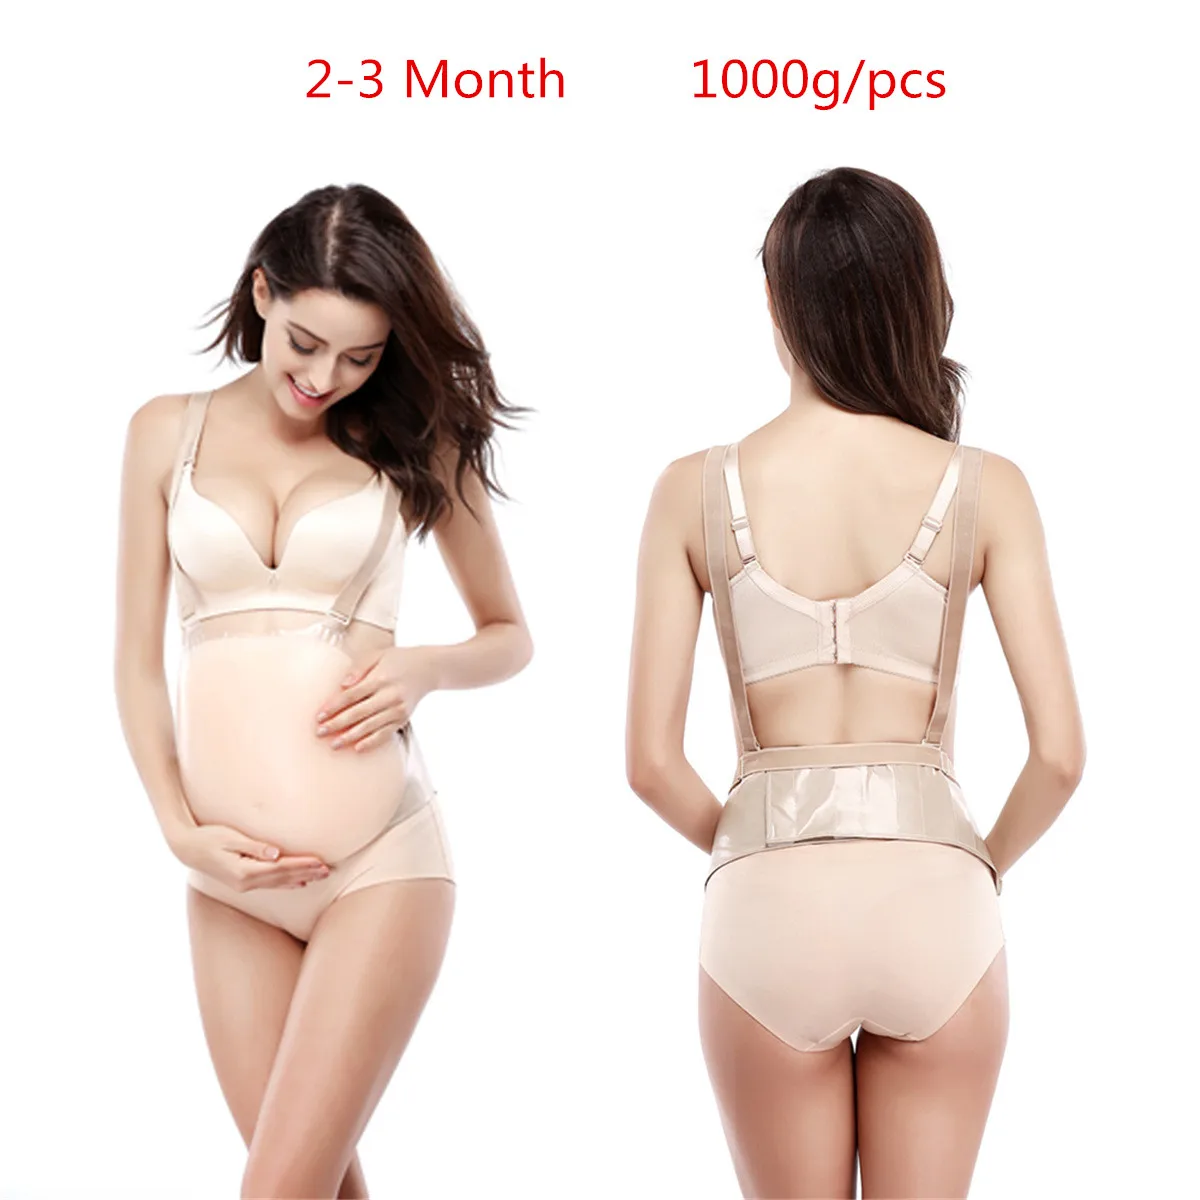 Lifelike Pregnant Women 2-3 Month Stage Skin Artificial Silicone Fake Belly 1000g/pcs Film Actress Pregnant Props